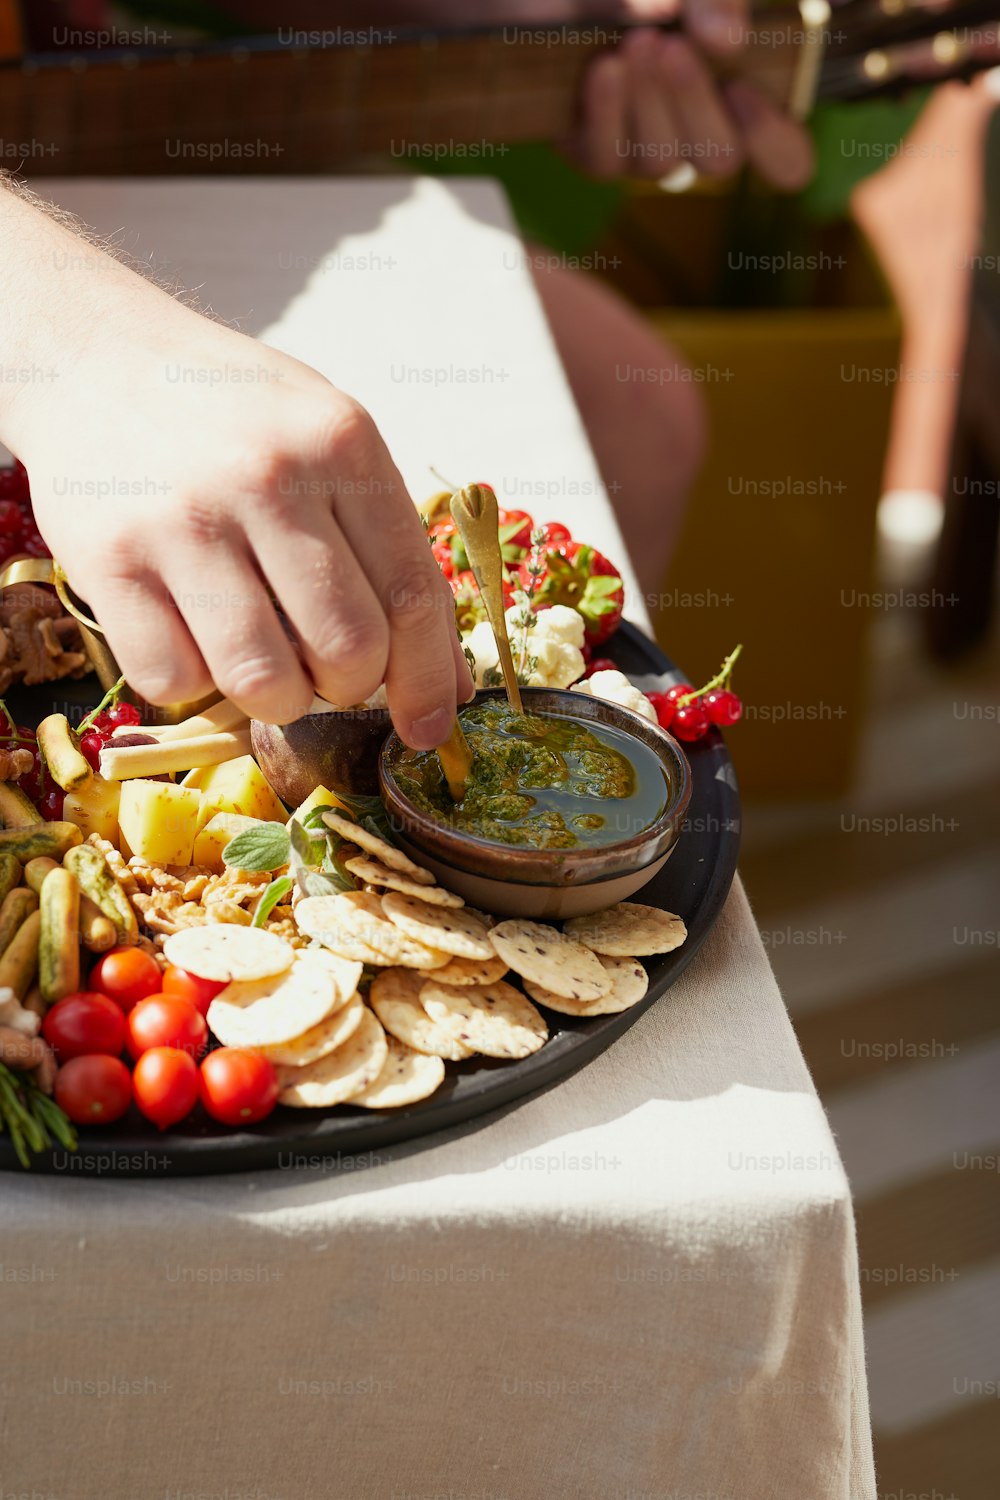 a plate of food with a person dipping sauce on top of it